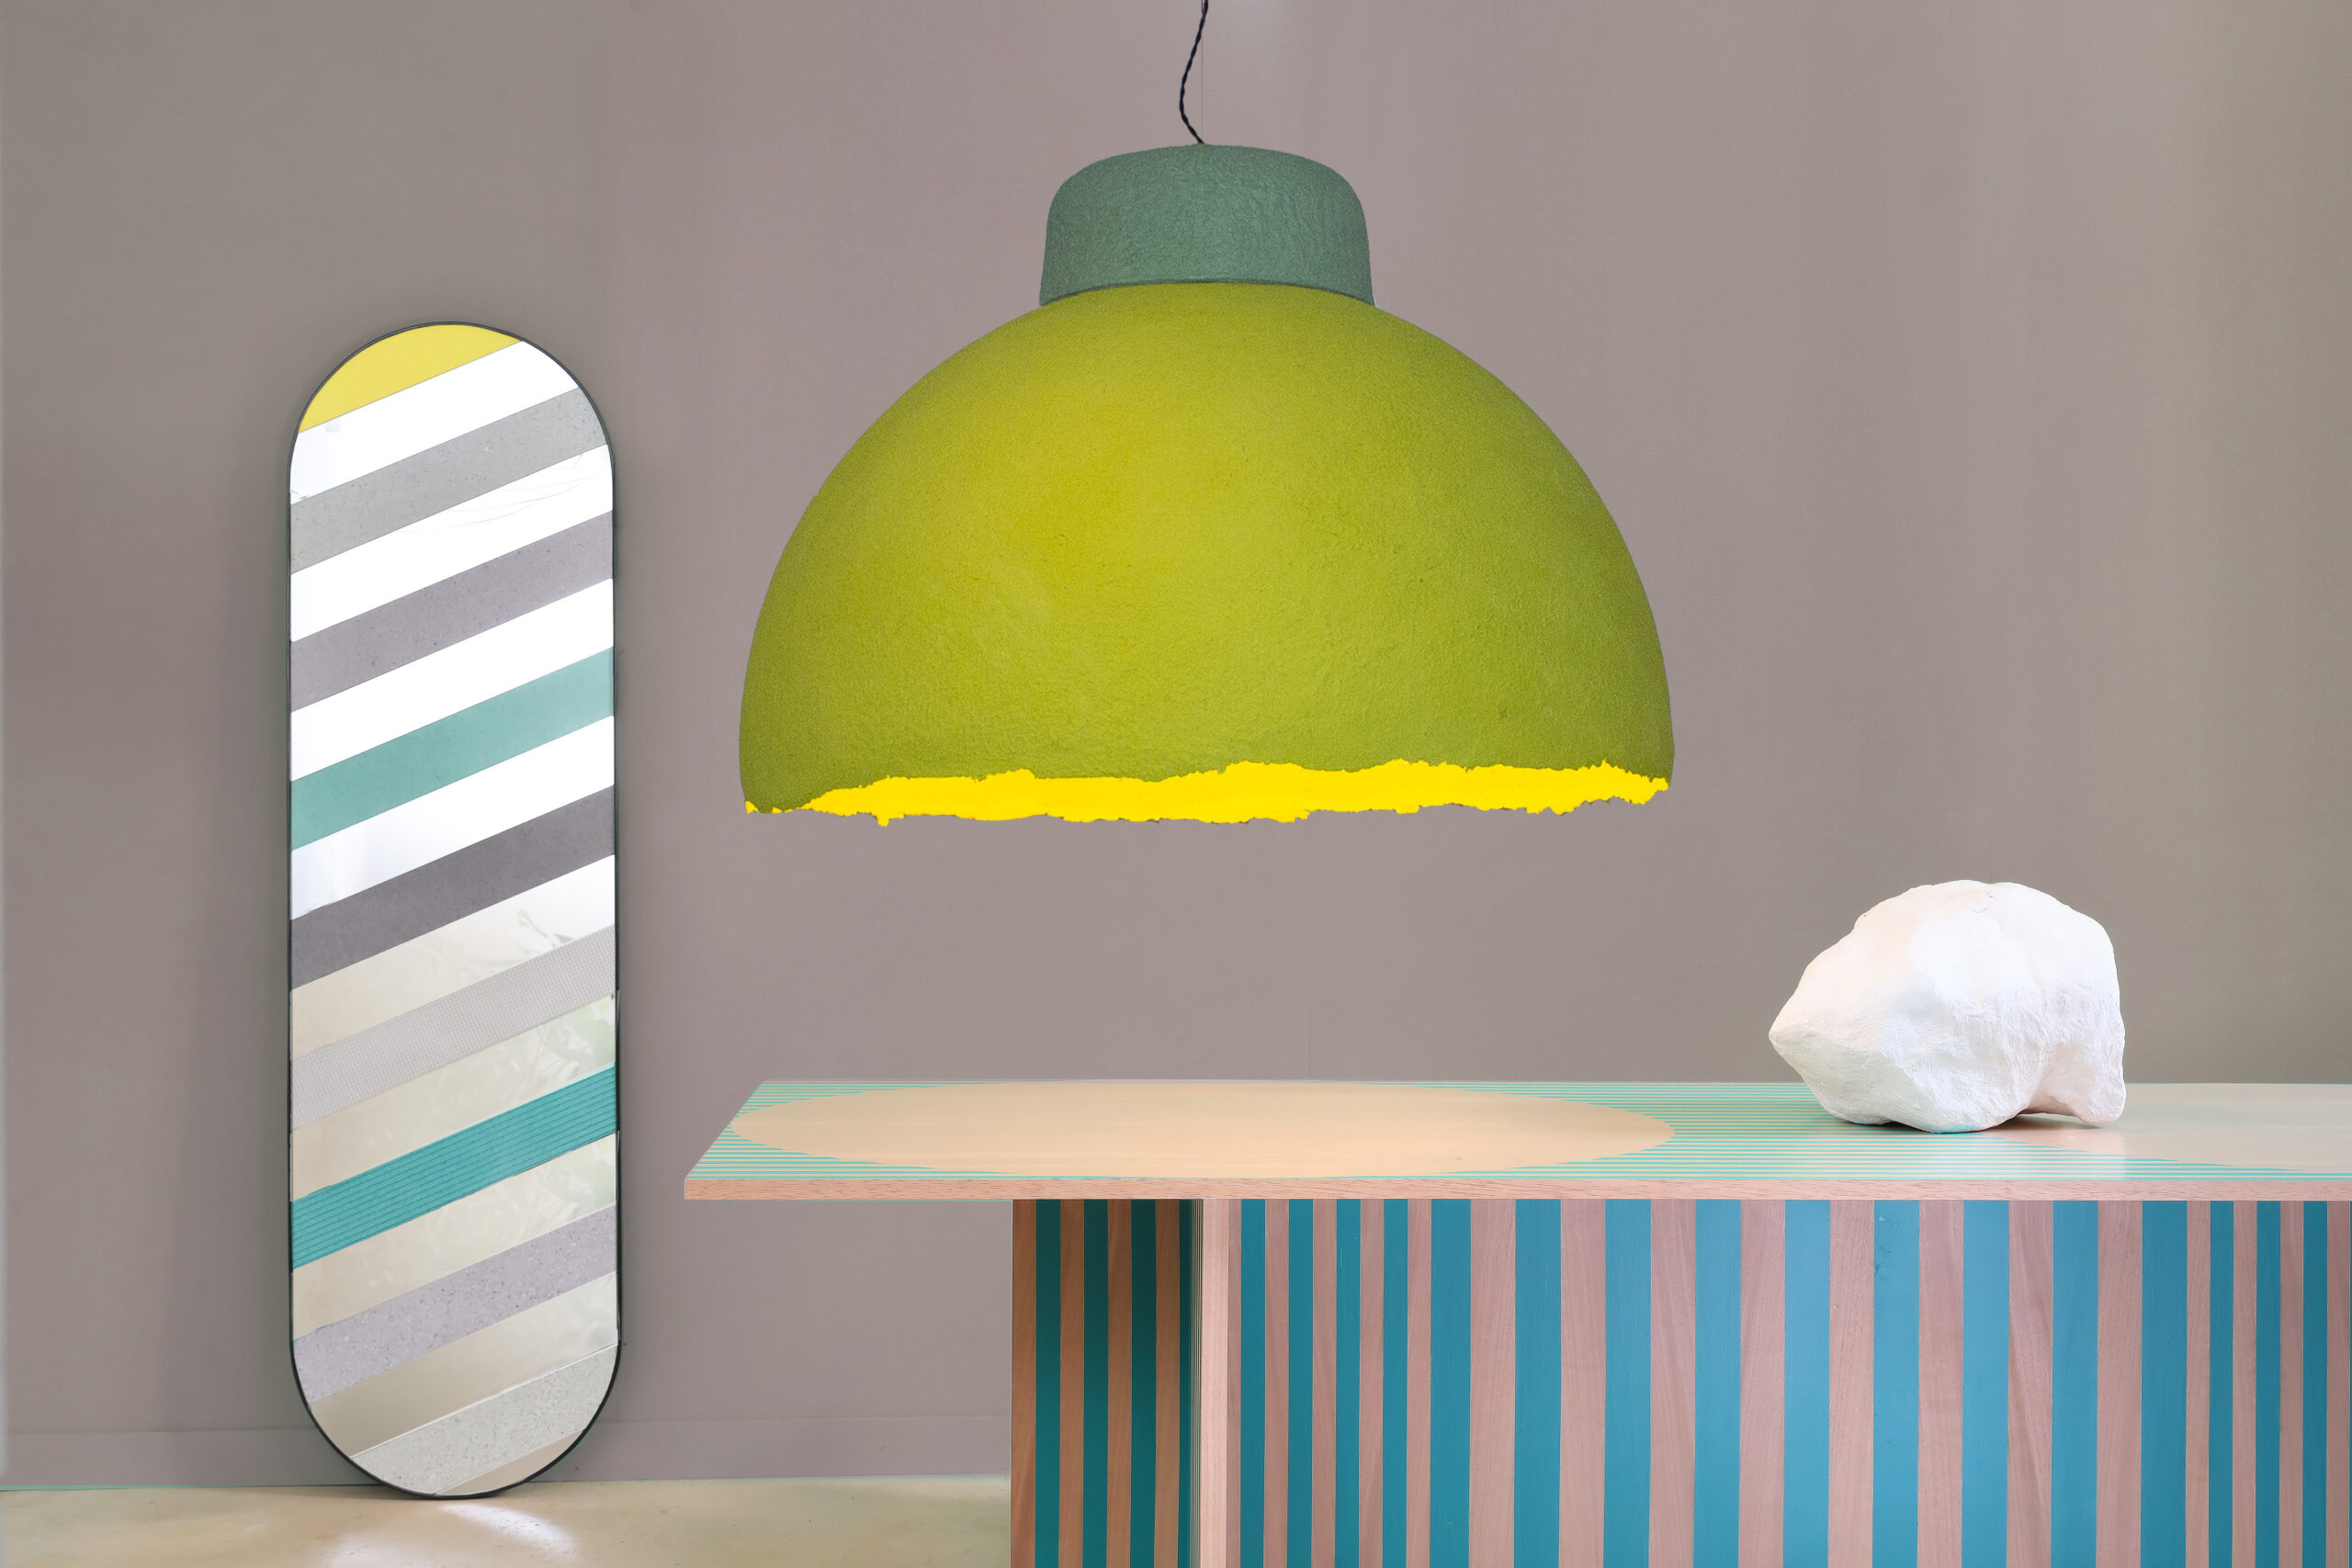 Italian design studio No Smoking The Future launches new lighting collection made from waste